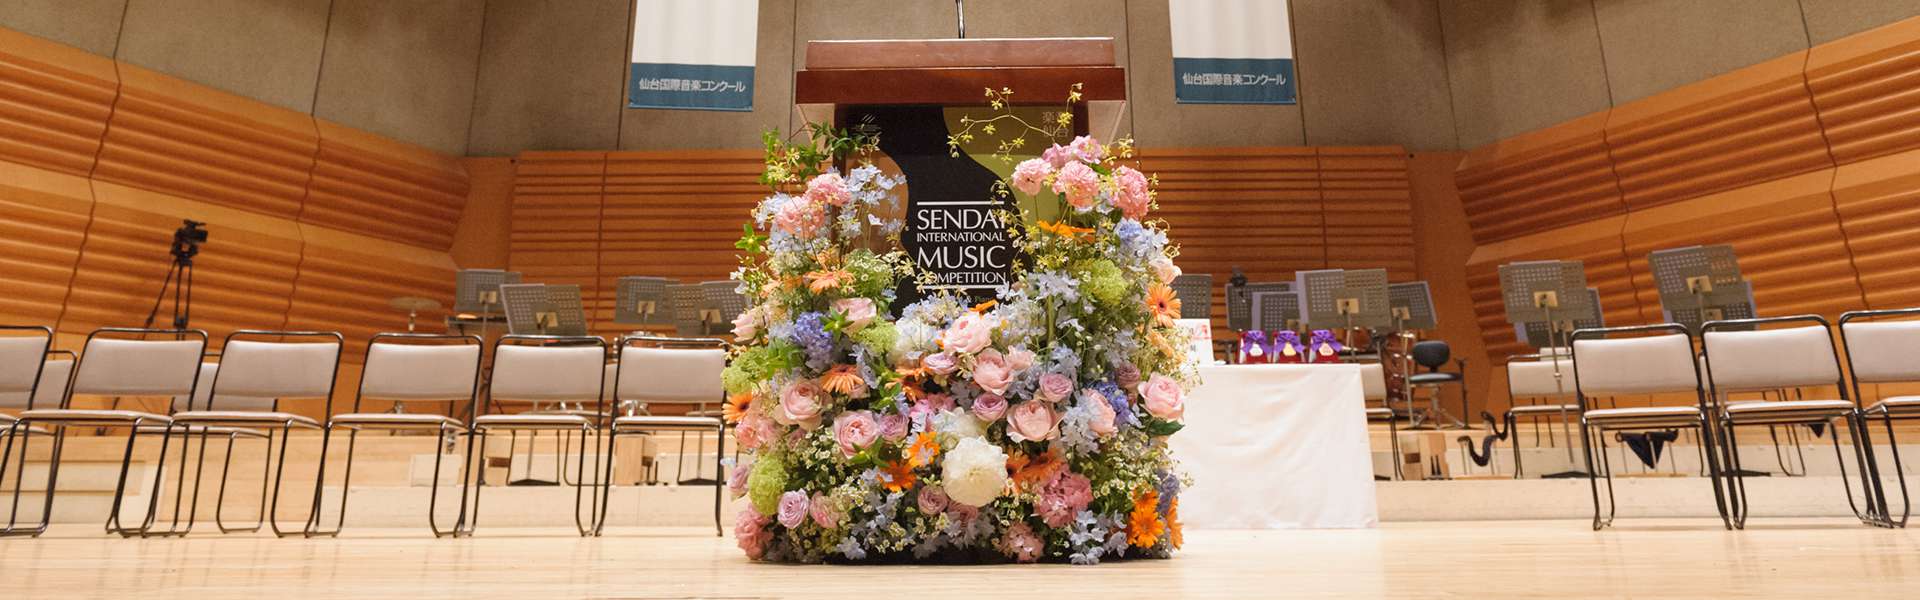 Number of Applicants, The 6th Sendai International Music Competition | Sendai International Music Competition Official Website